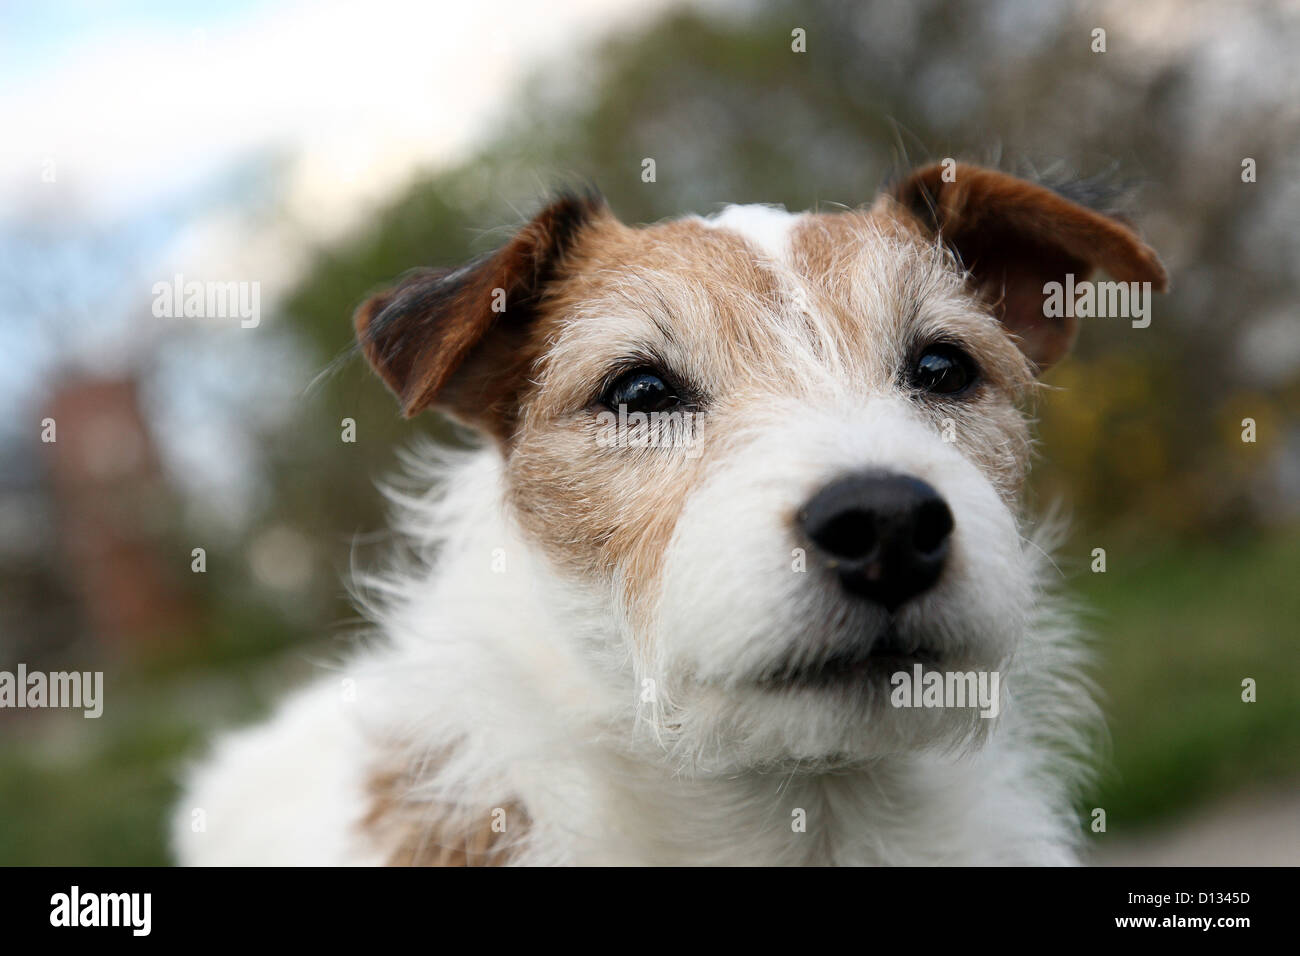 Berlin, Germany, Portrait of a Parson Russell Terrier Stock Photo